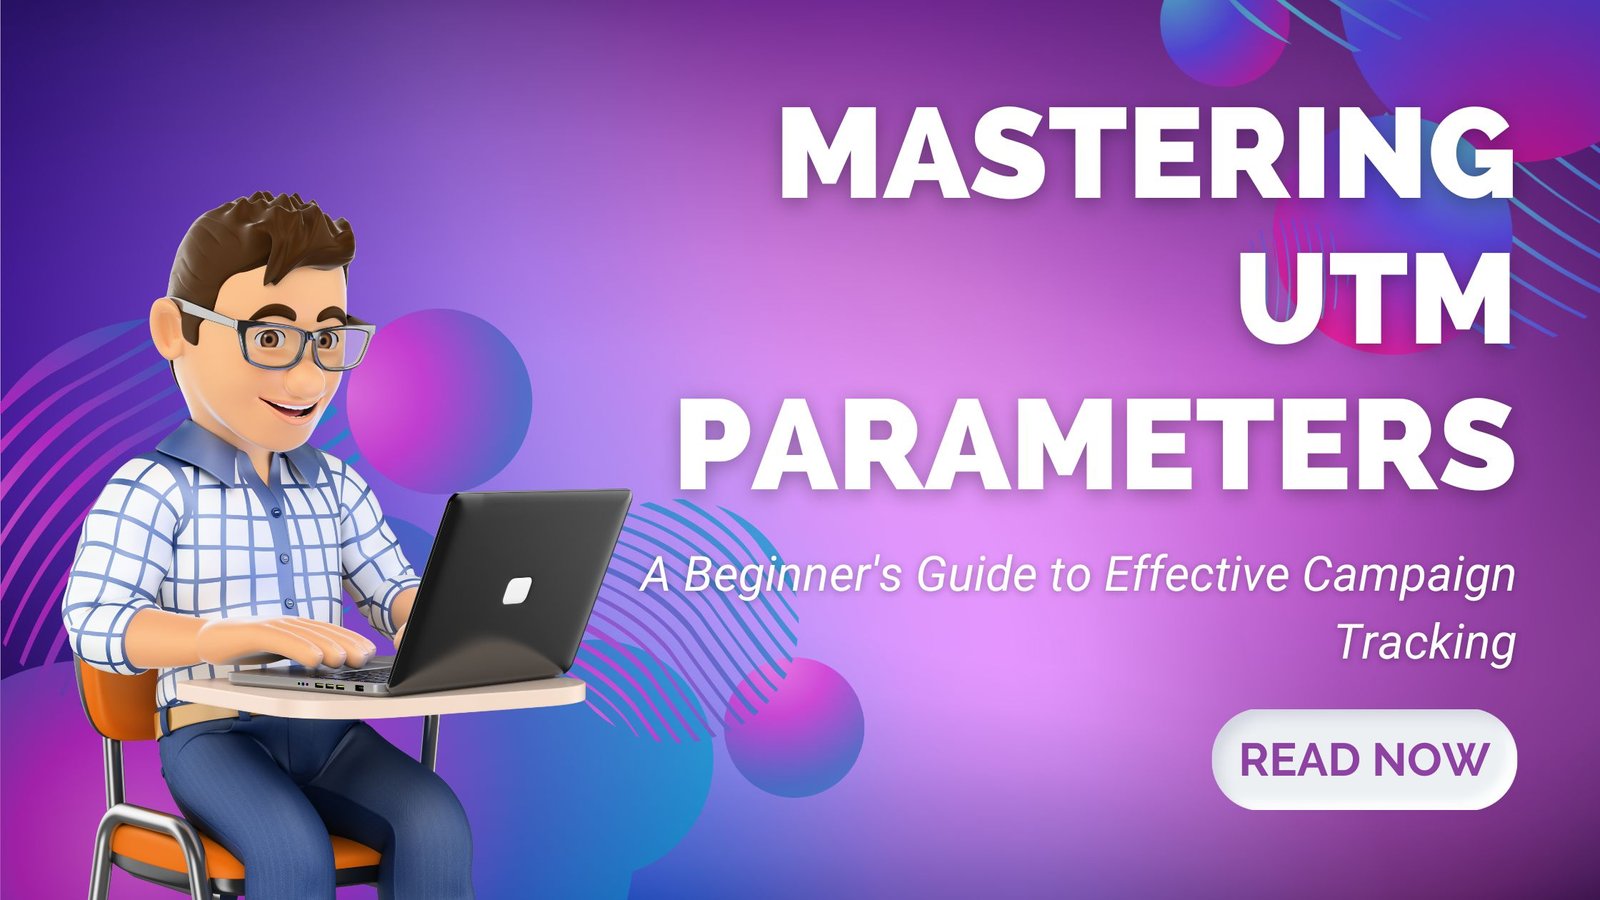 Mastering UTM Parameters: A Beginner's Guide to Effective Campaign Tracking